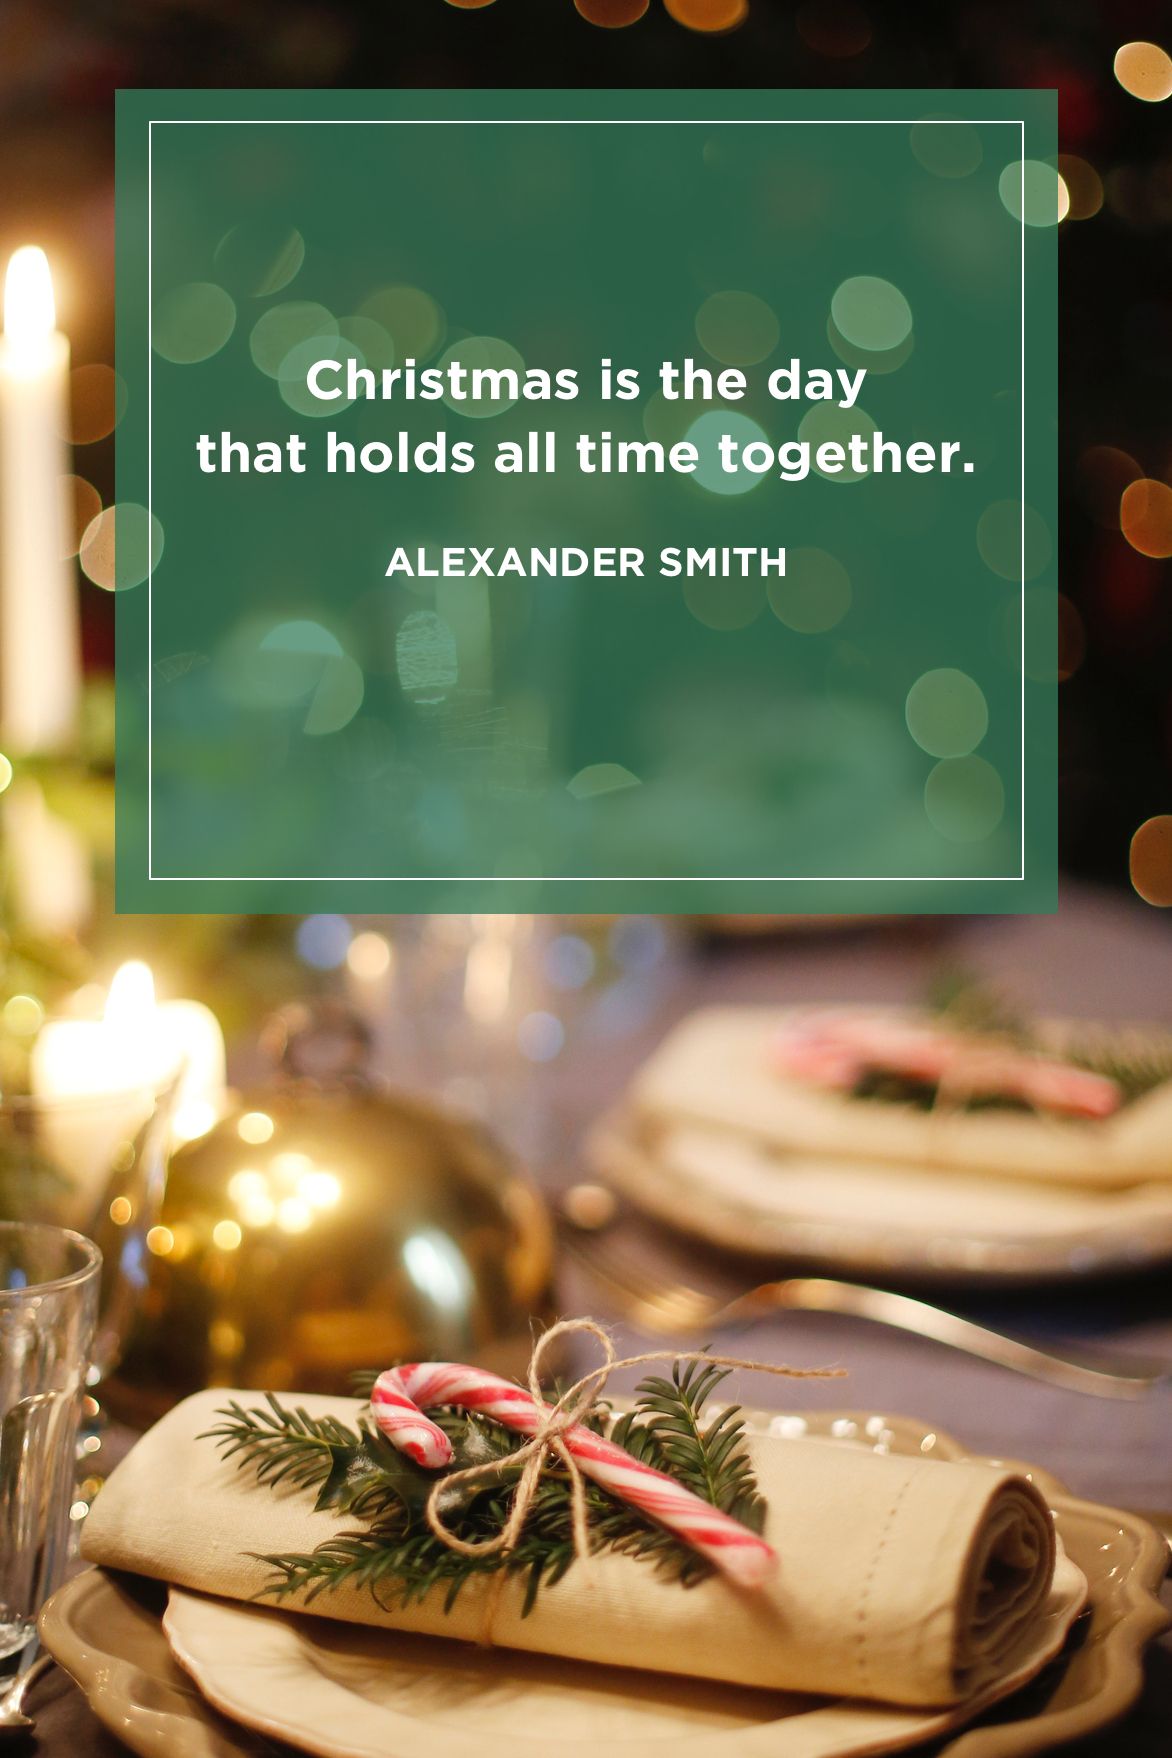 75 Best Christmas Quotes Most Inspiring Festive Holiday Sayings